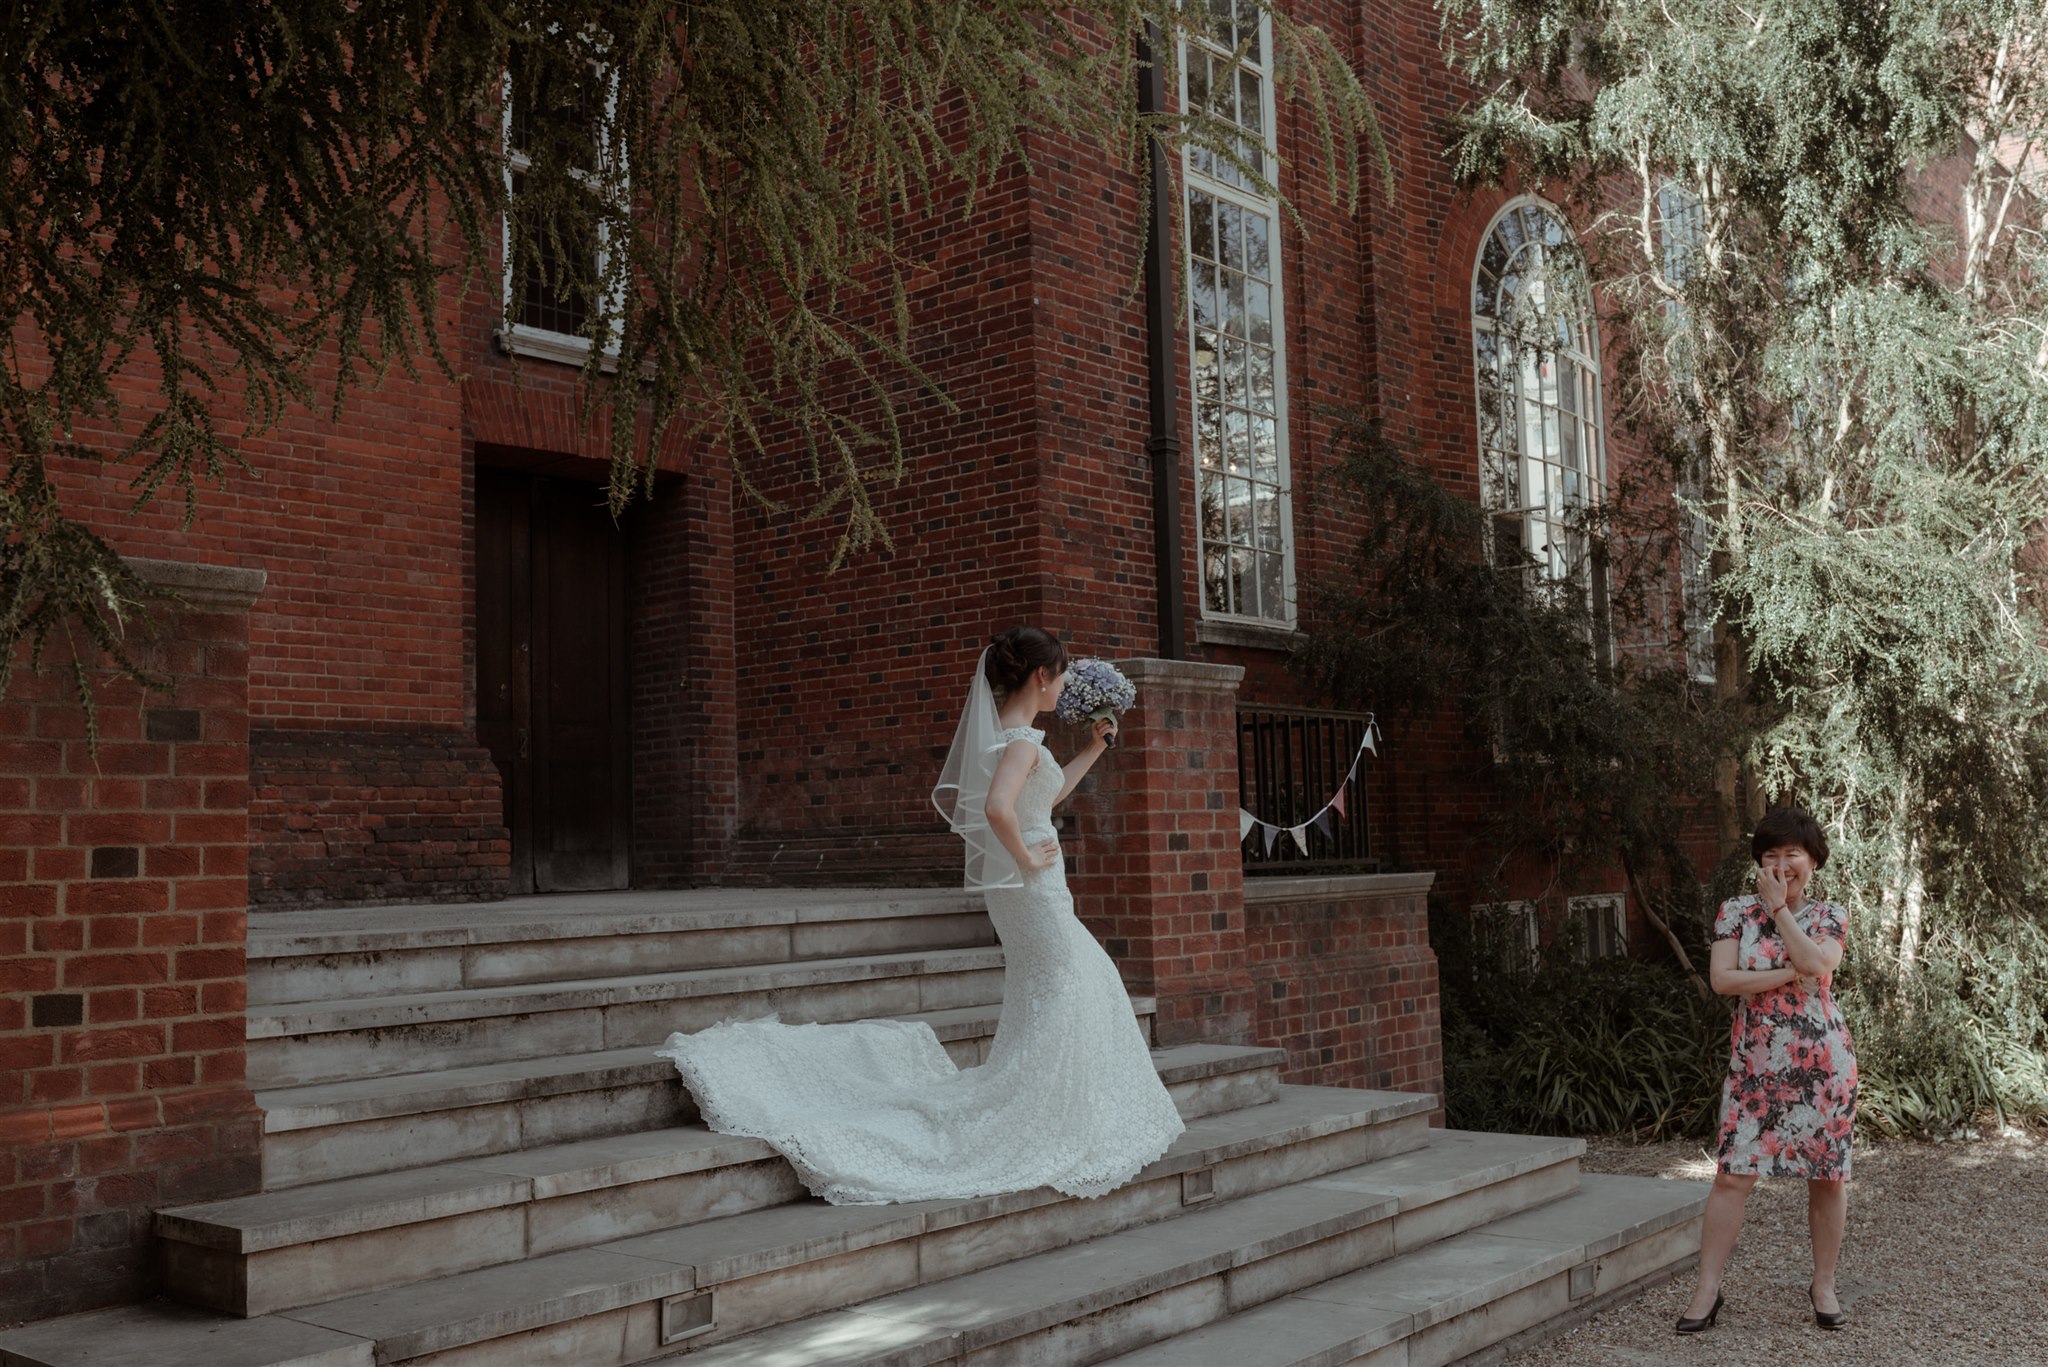 royal geographical society wedding photography in London, modern romantic and candid